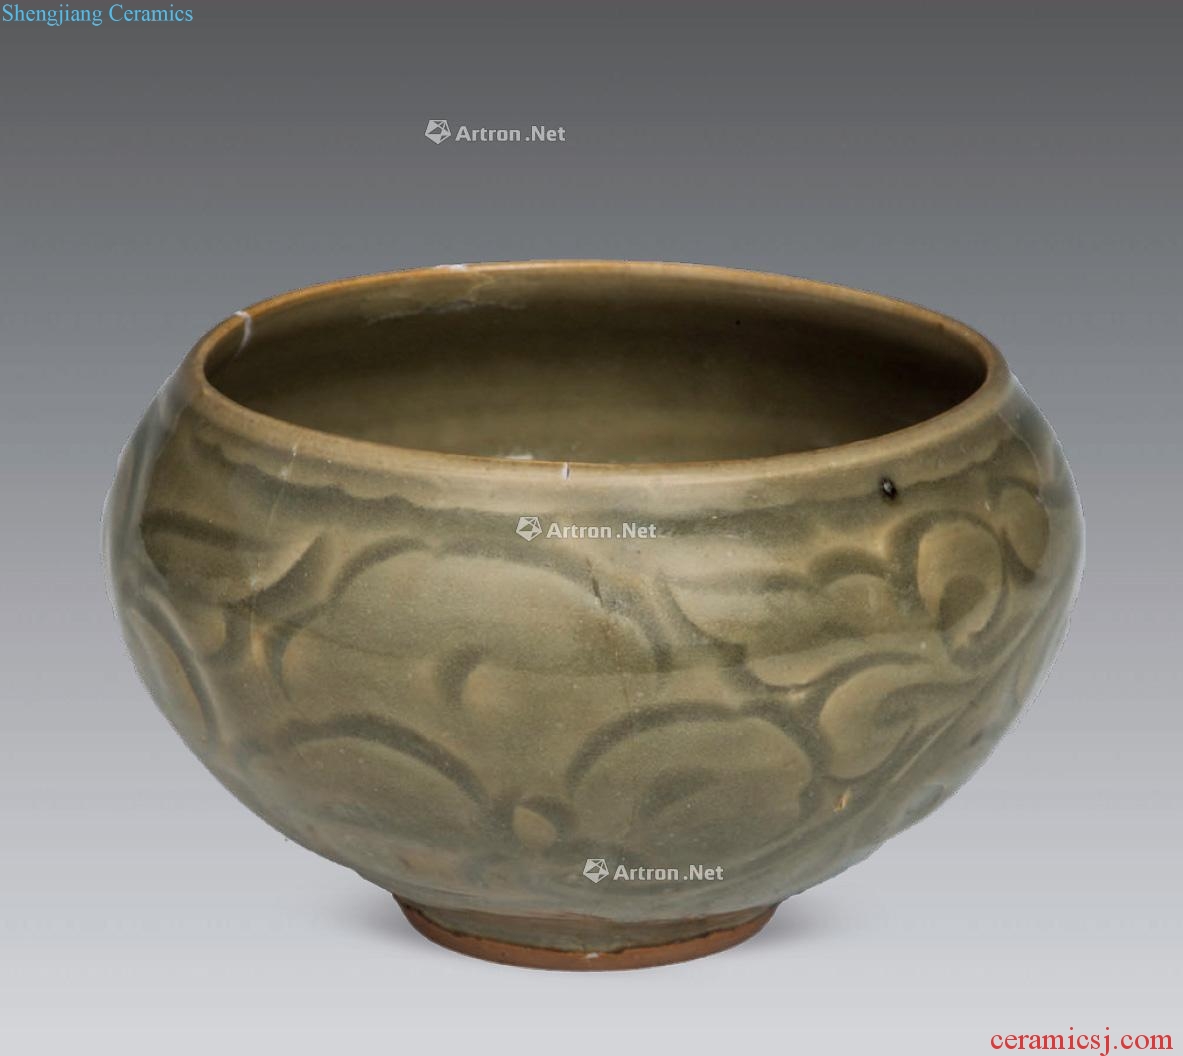 The song dynasty Yao states carved bowl